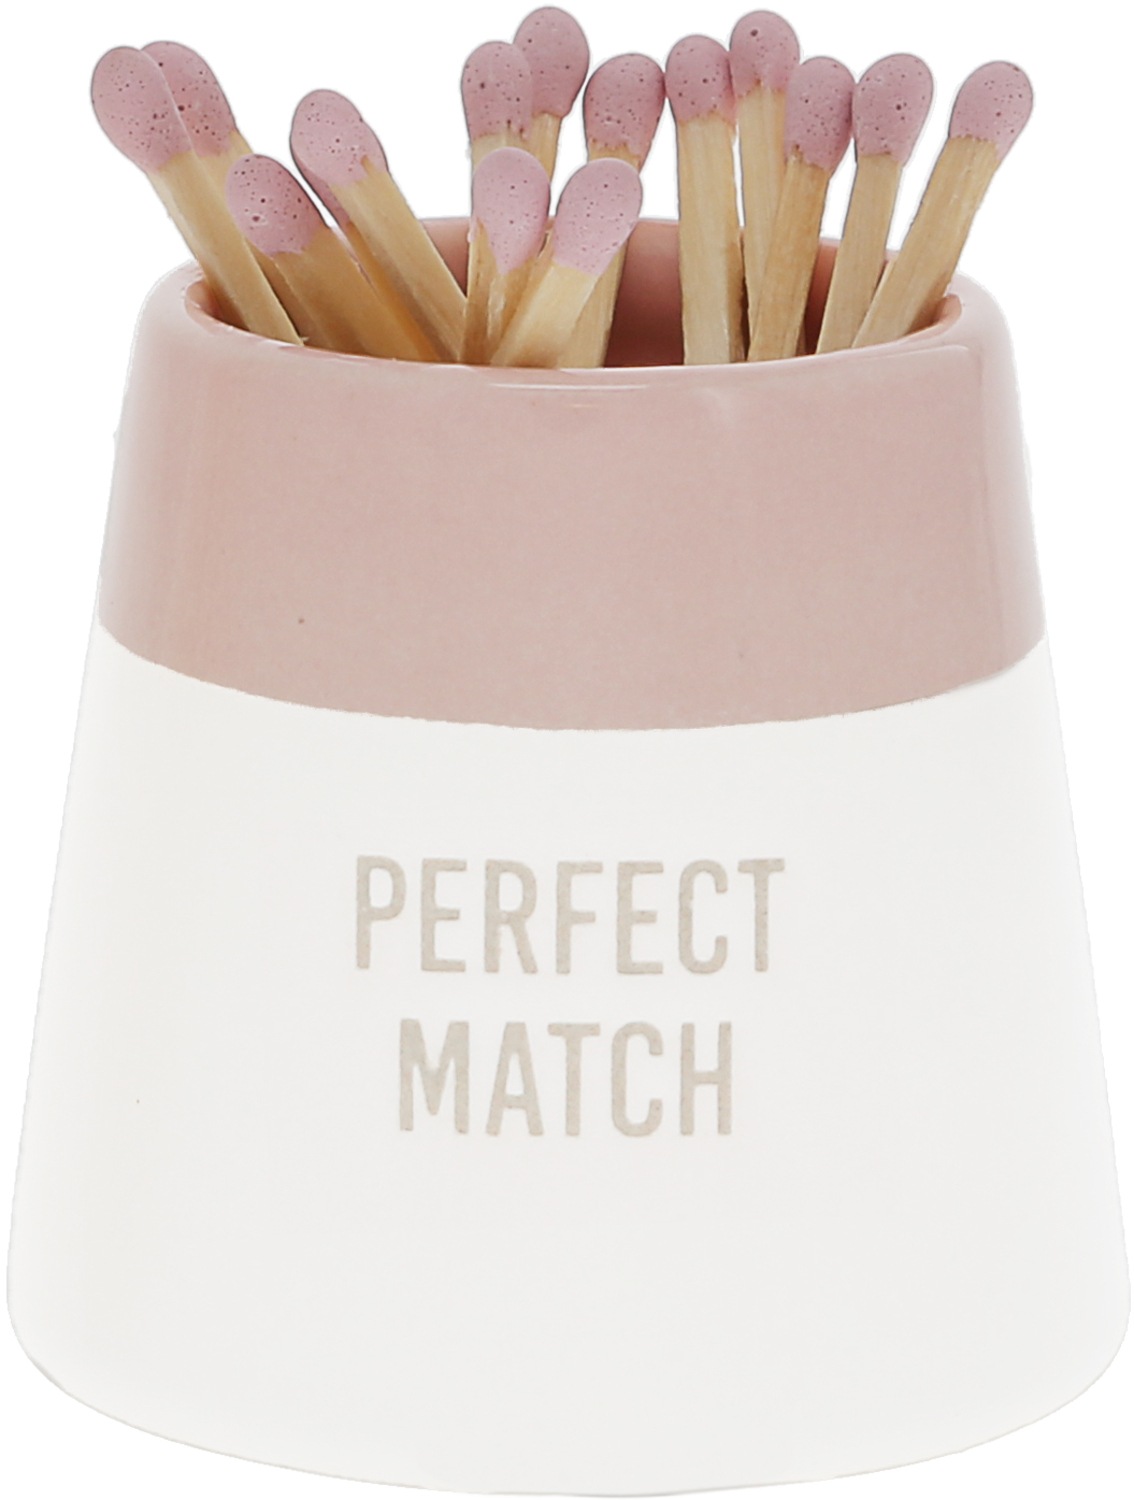 Perfect Match by Love You - Perfect Match - 2.25" Match Holder and Matches